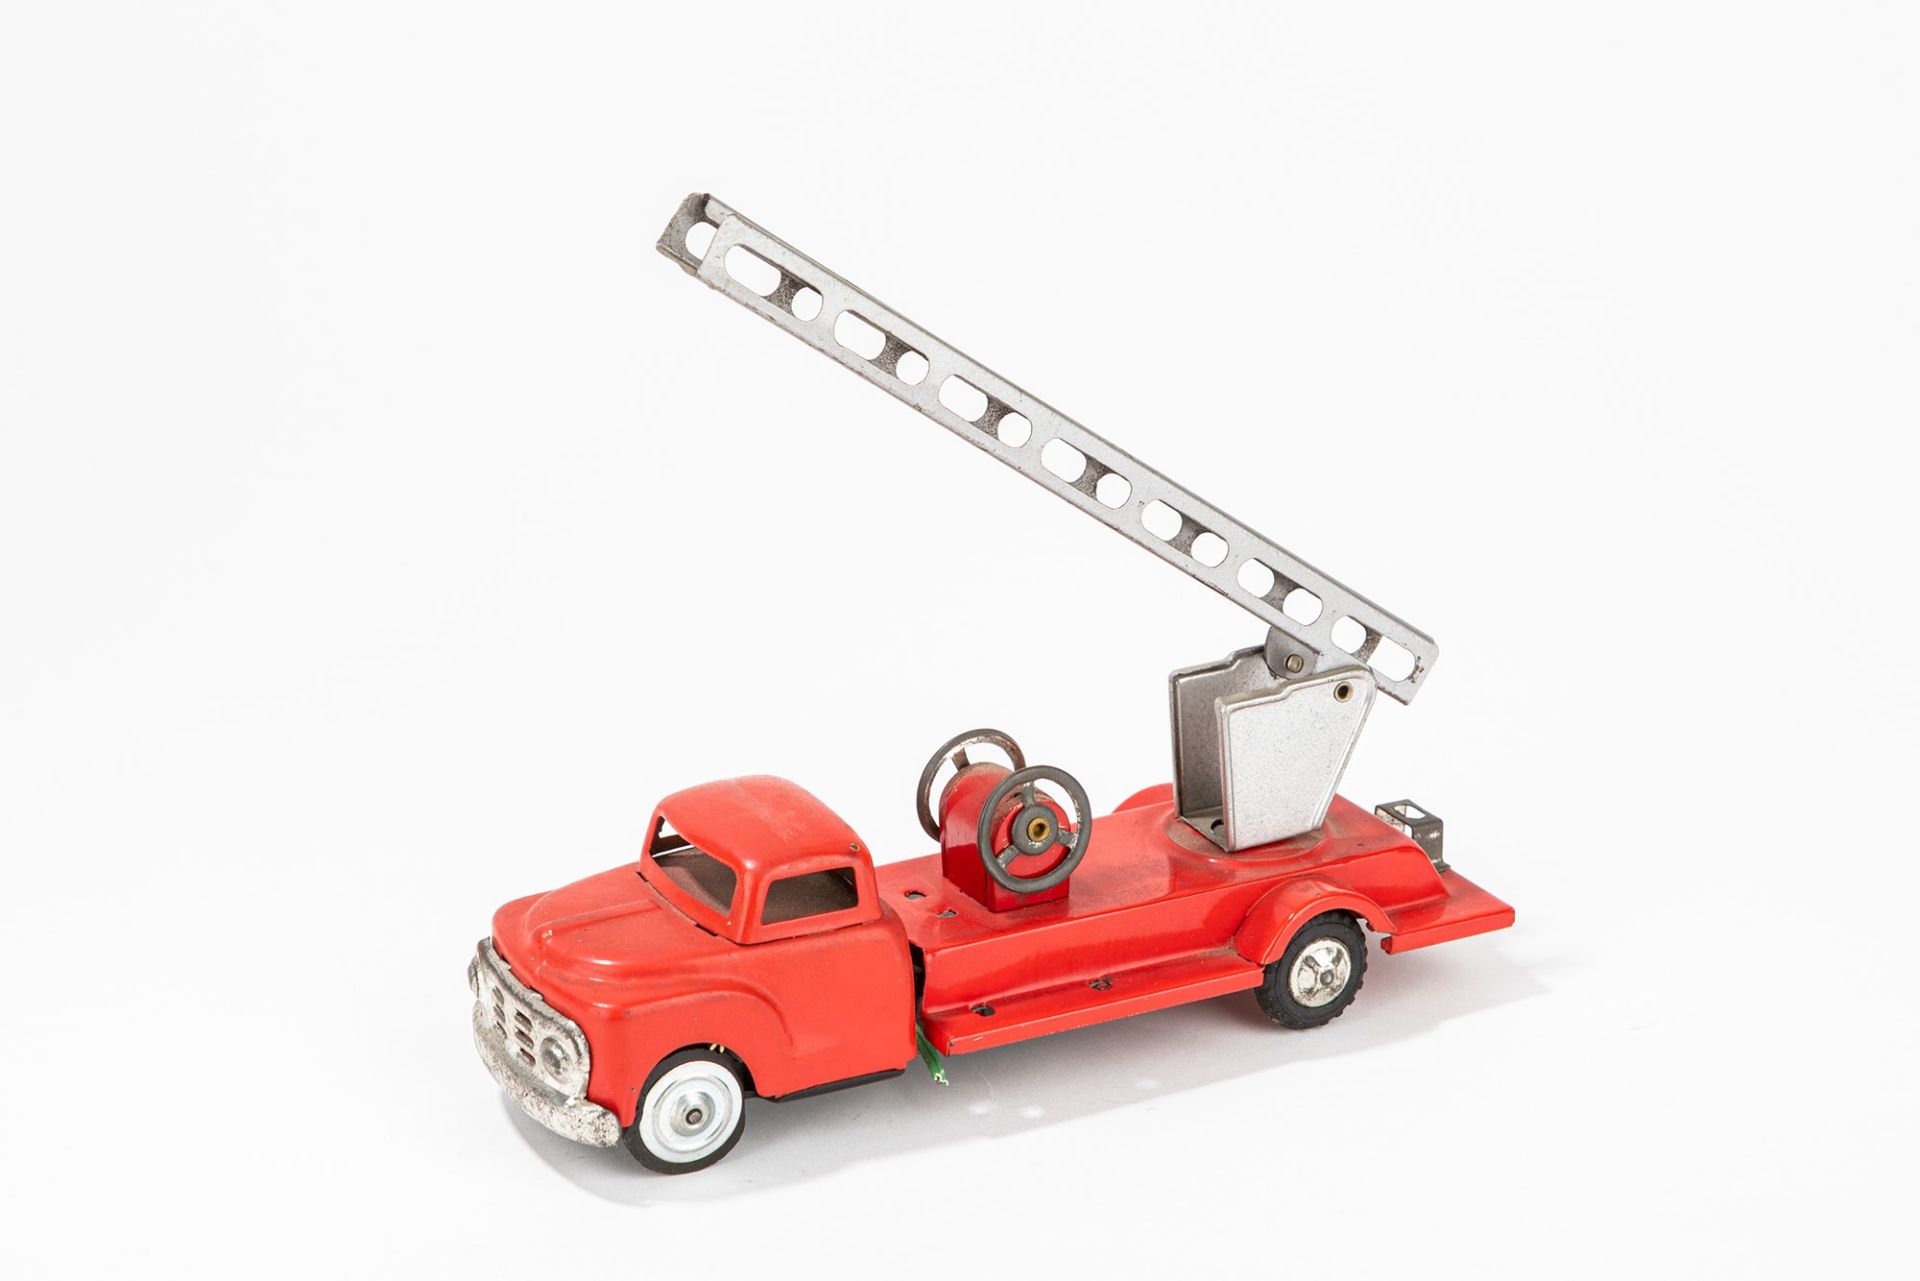 Fire truck with ladder and remote control